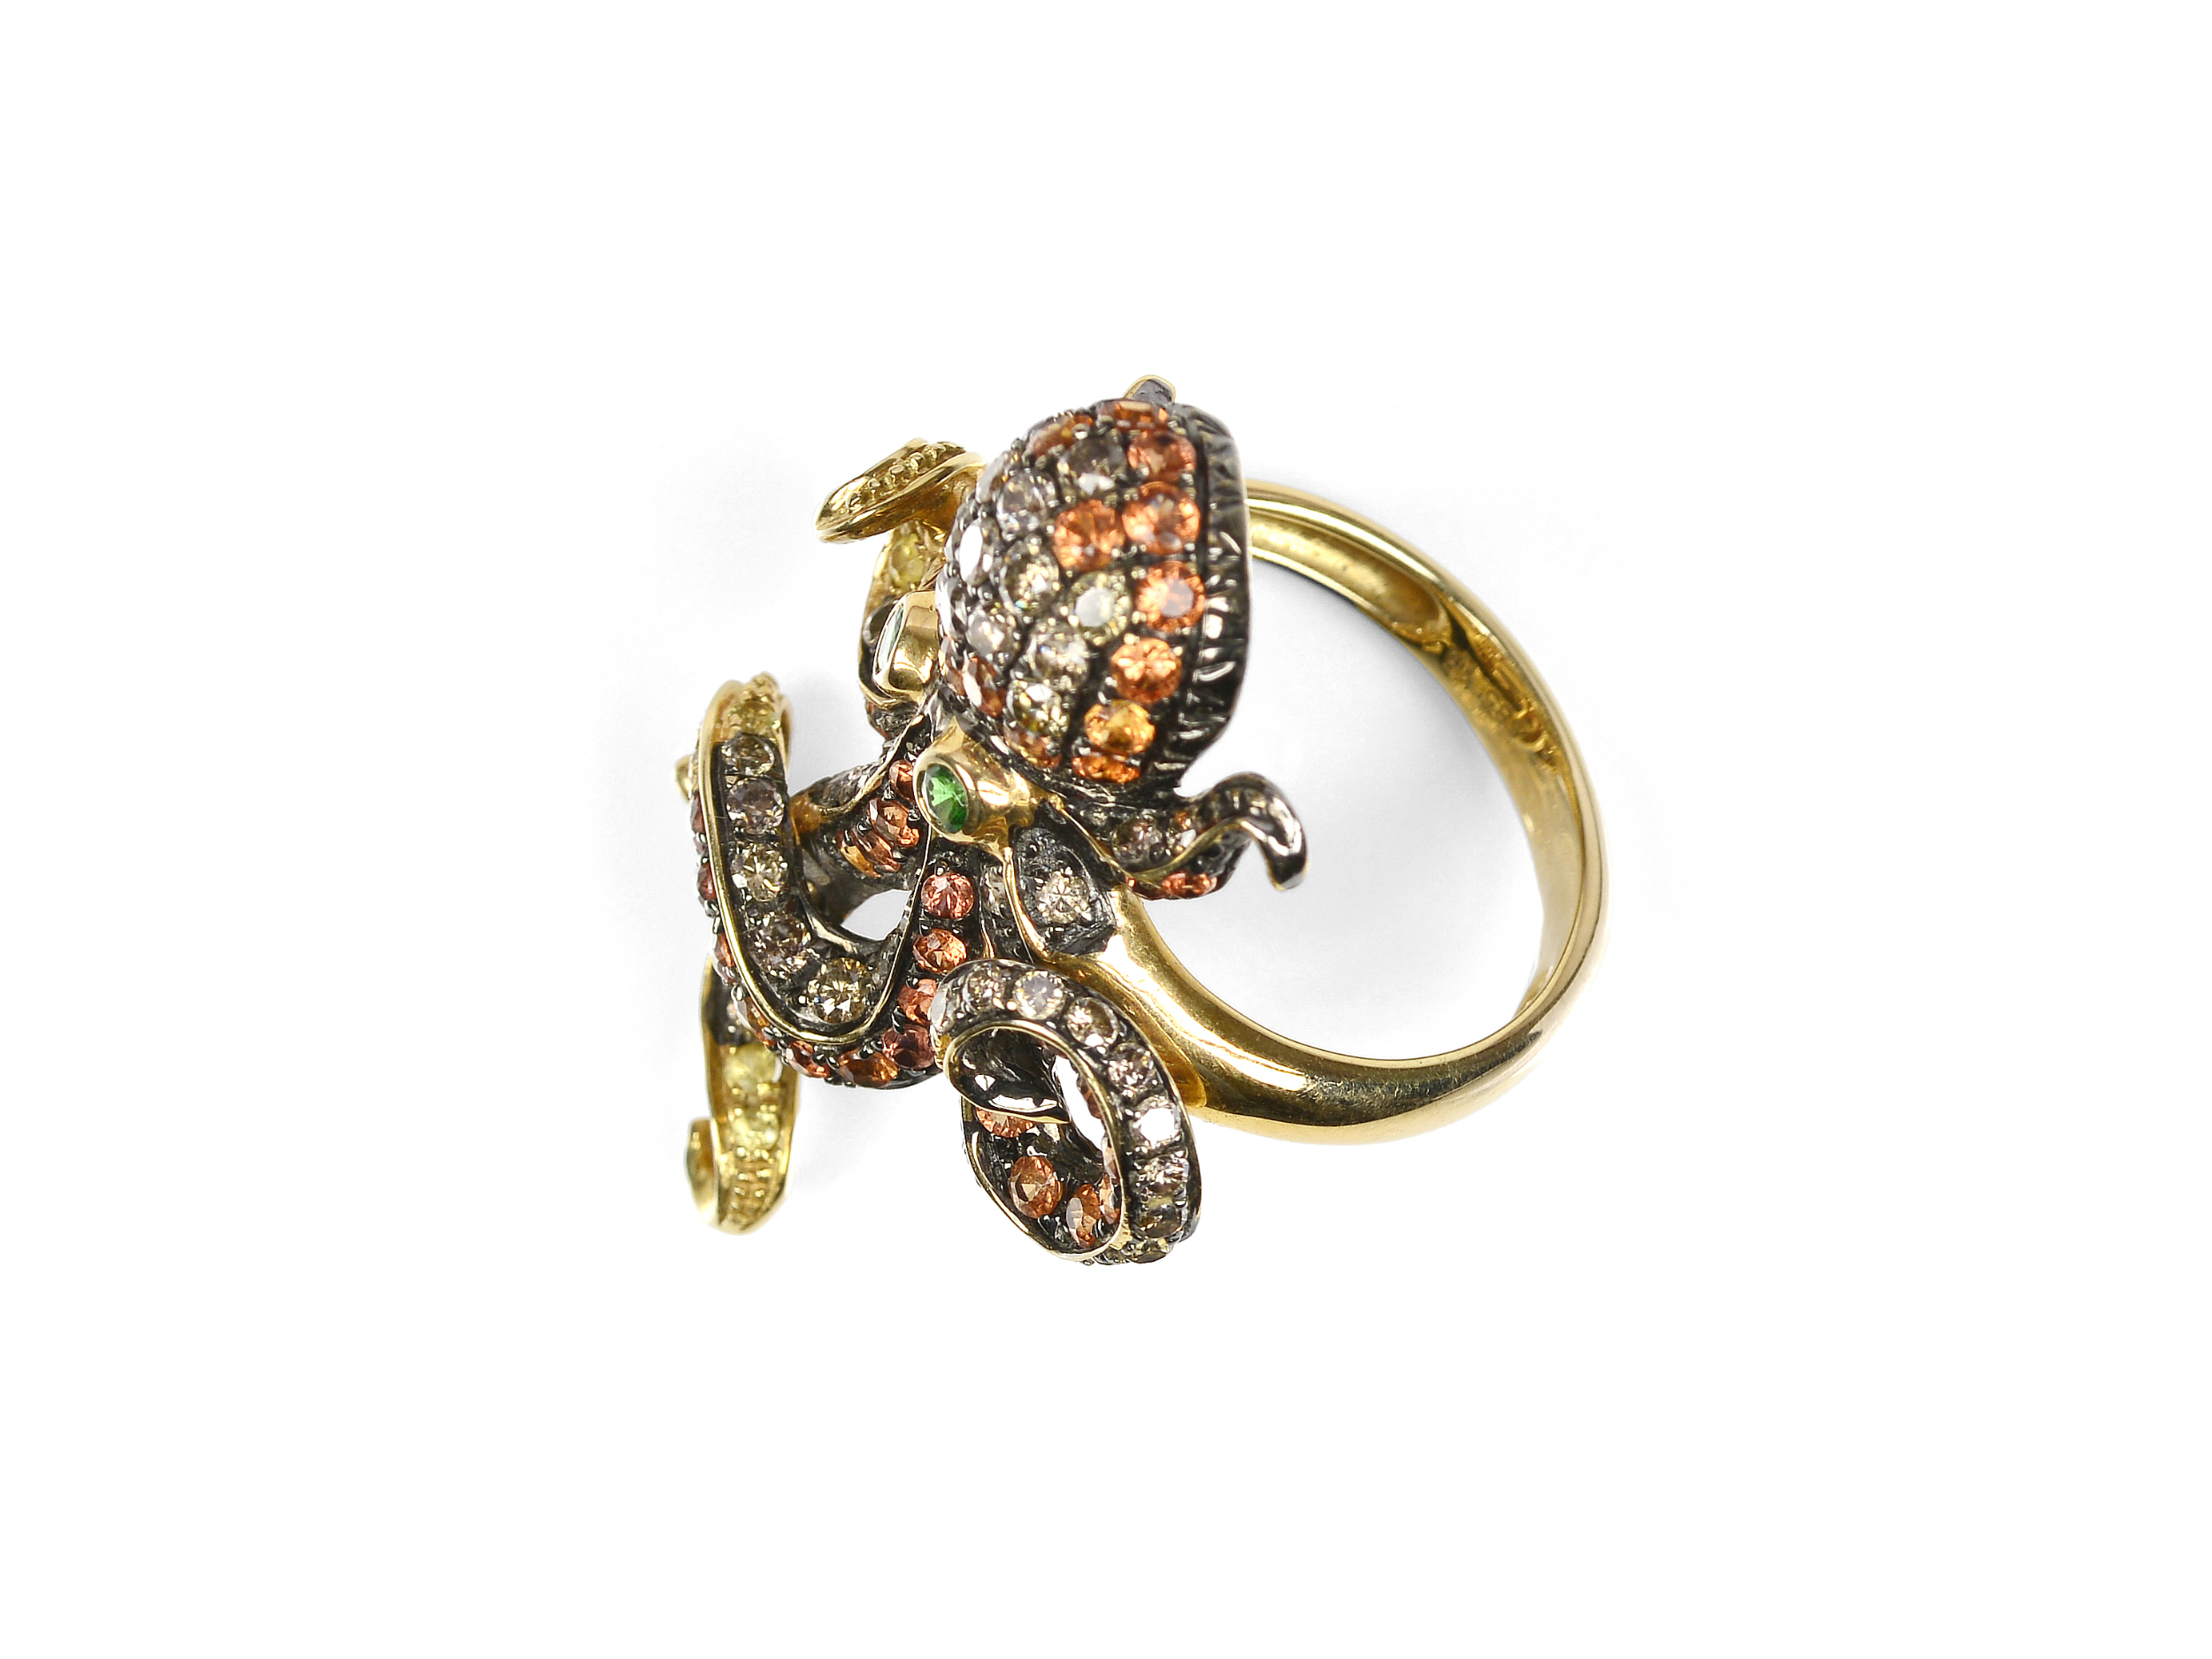 Ring with an octopus - Image 5 of 5